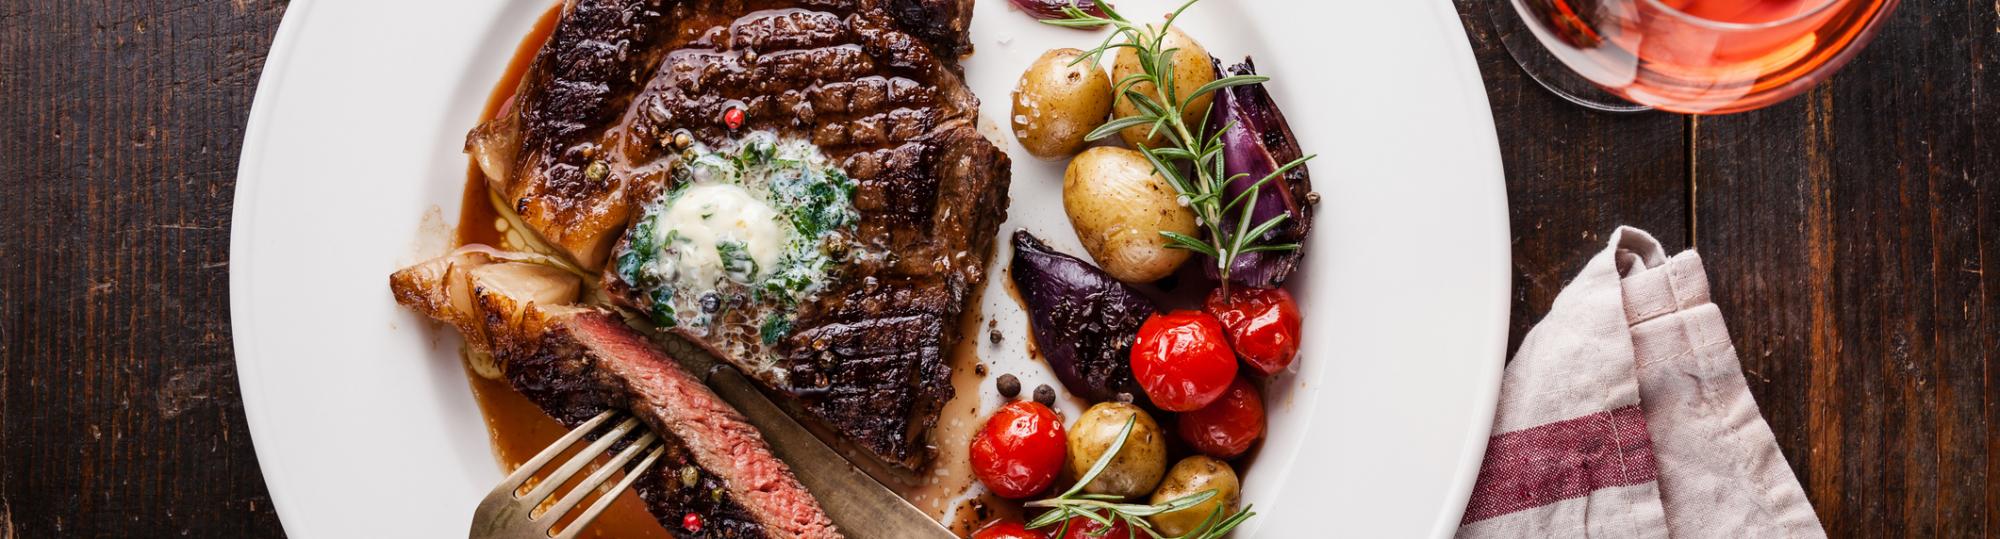 Omaha Steaks Military Discount with Veterans Advantage